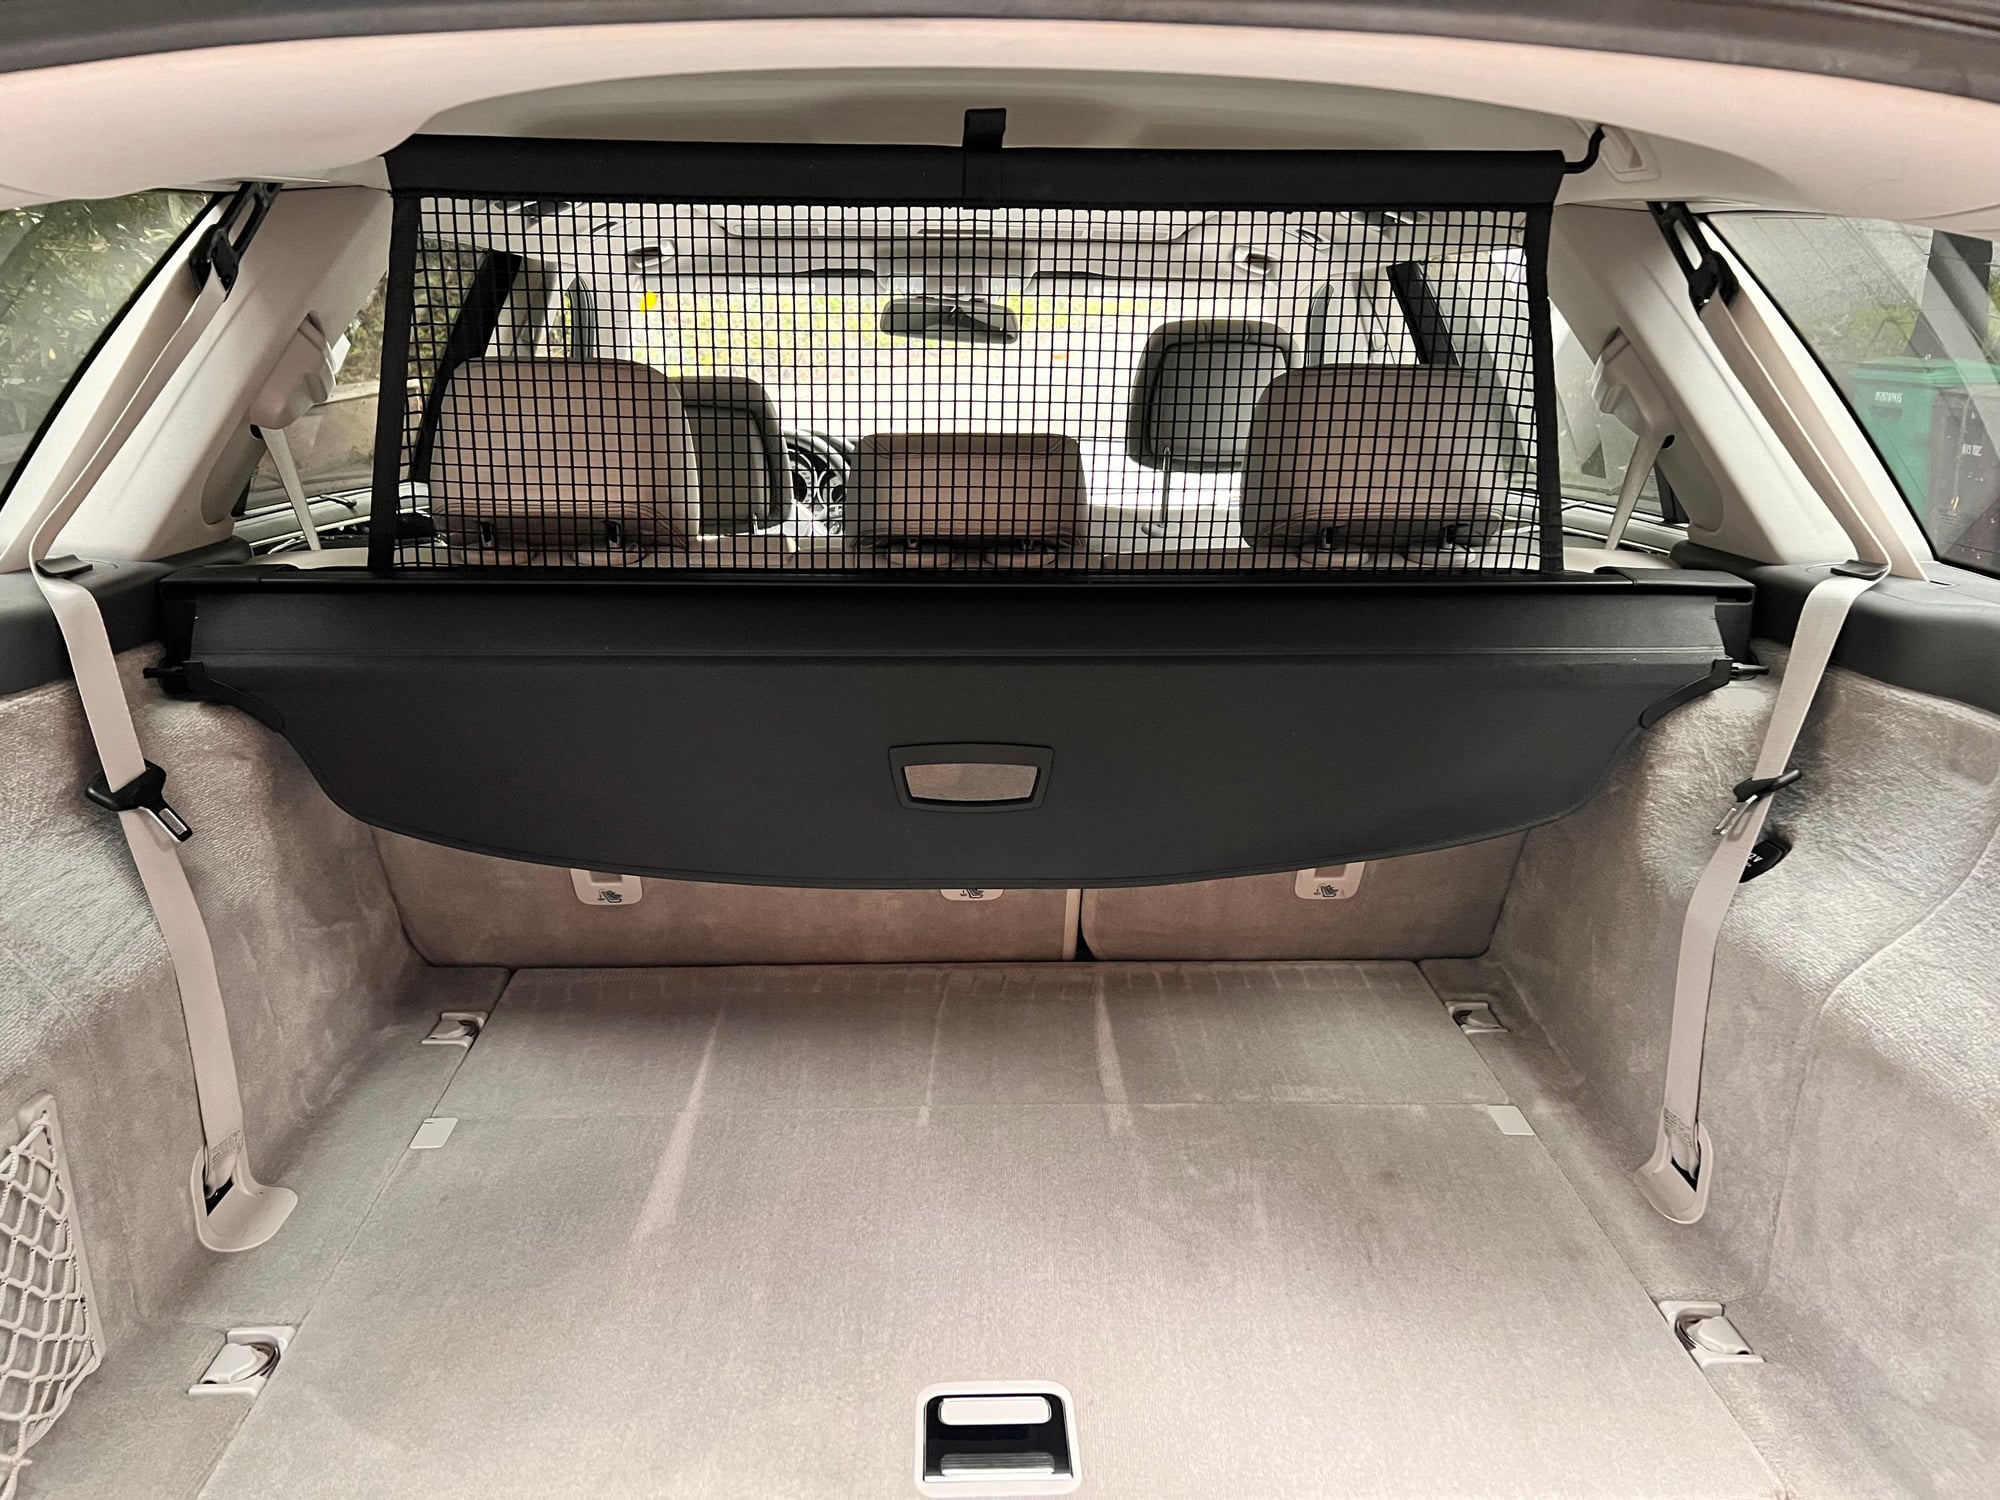 Interior/Upholstery - FS: rear cargo cover for s212 Wagon - Used - 2010 to 2016 Mercedes-Benz E350 - Oakland, CA 94611, United States